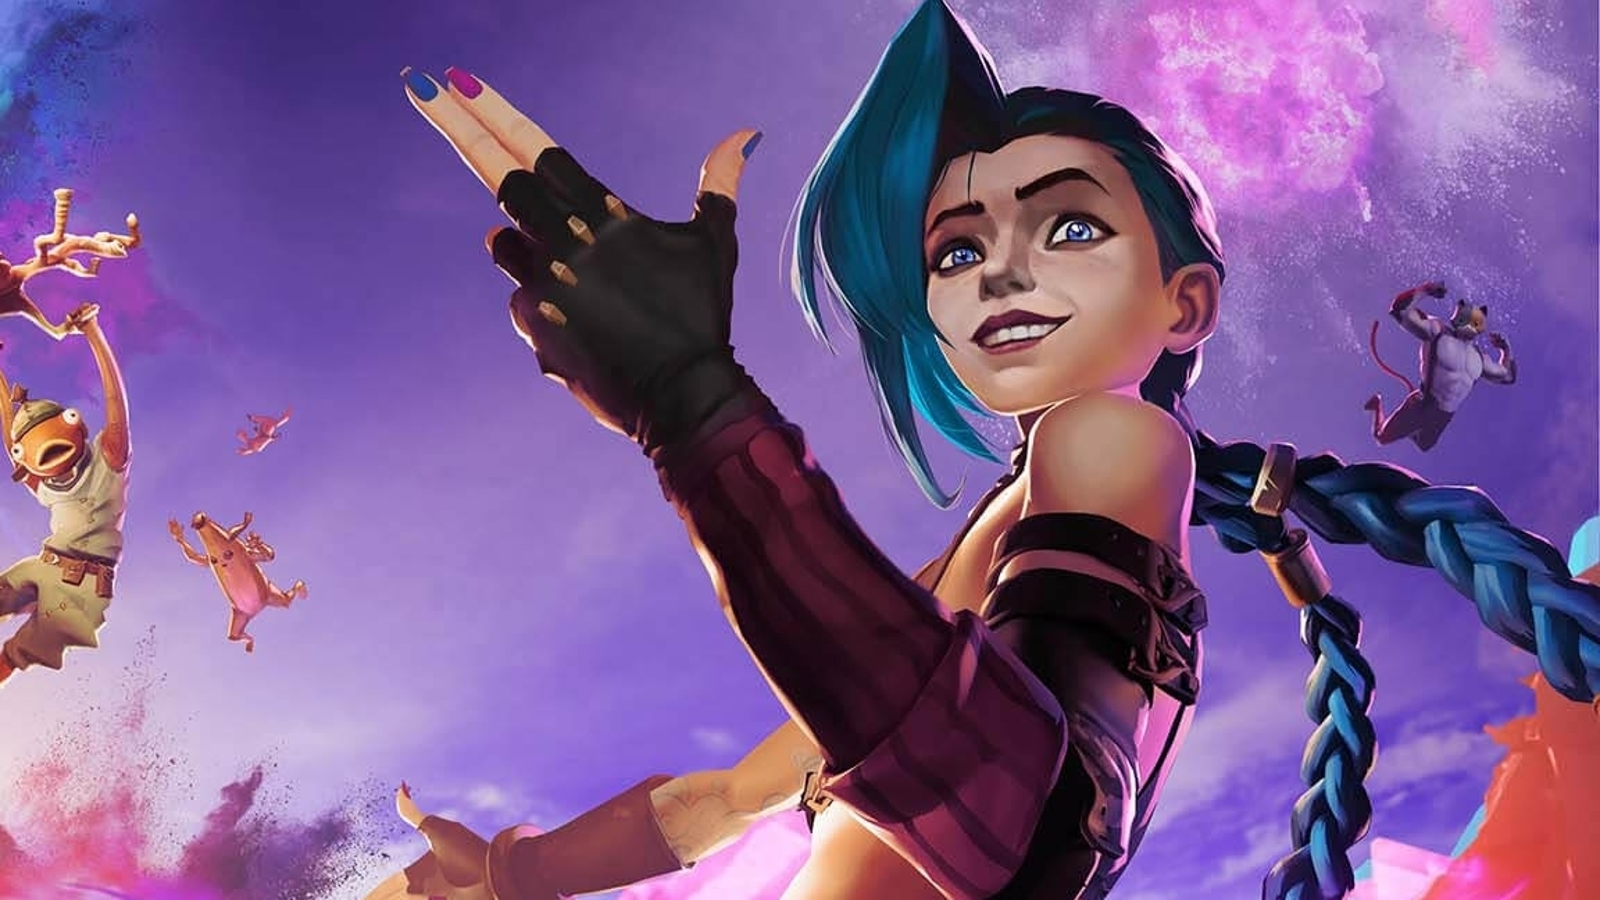 League of Legends' Jinx joins Fortnite ahead of Netflix's animated